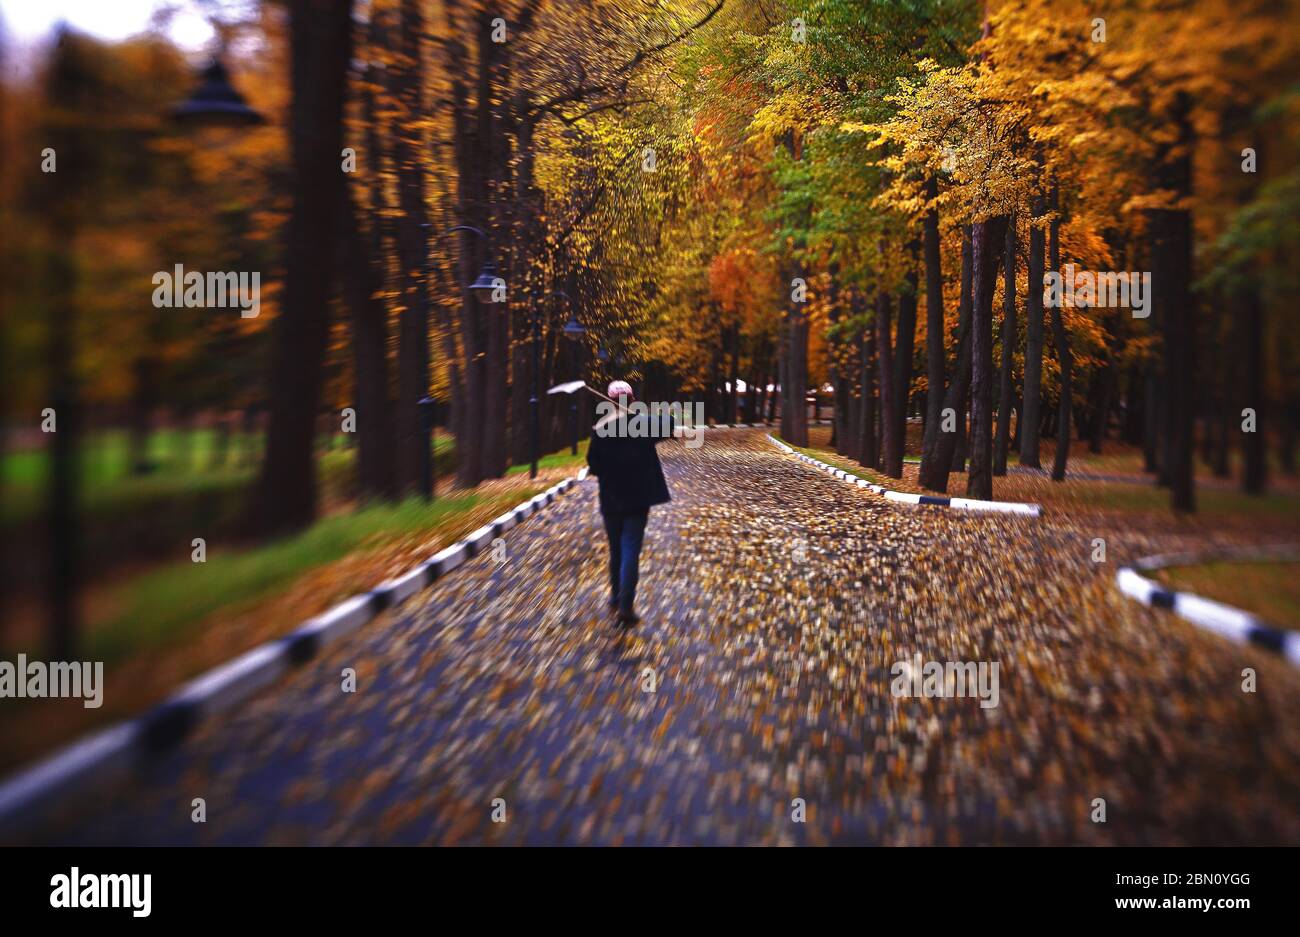 janitor with a shovel walking away, fallen leaves on a autumn street. Cleaning leaves in the city, street sweeper with broom, fall season Stock Photo